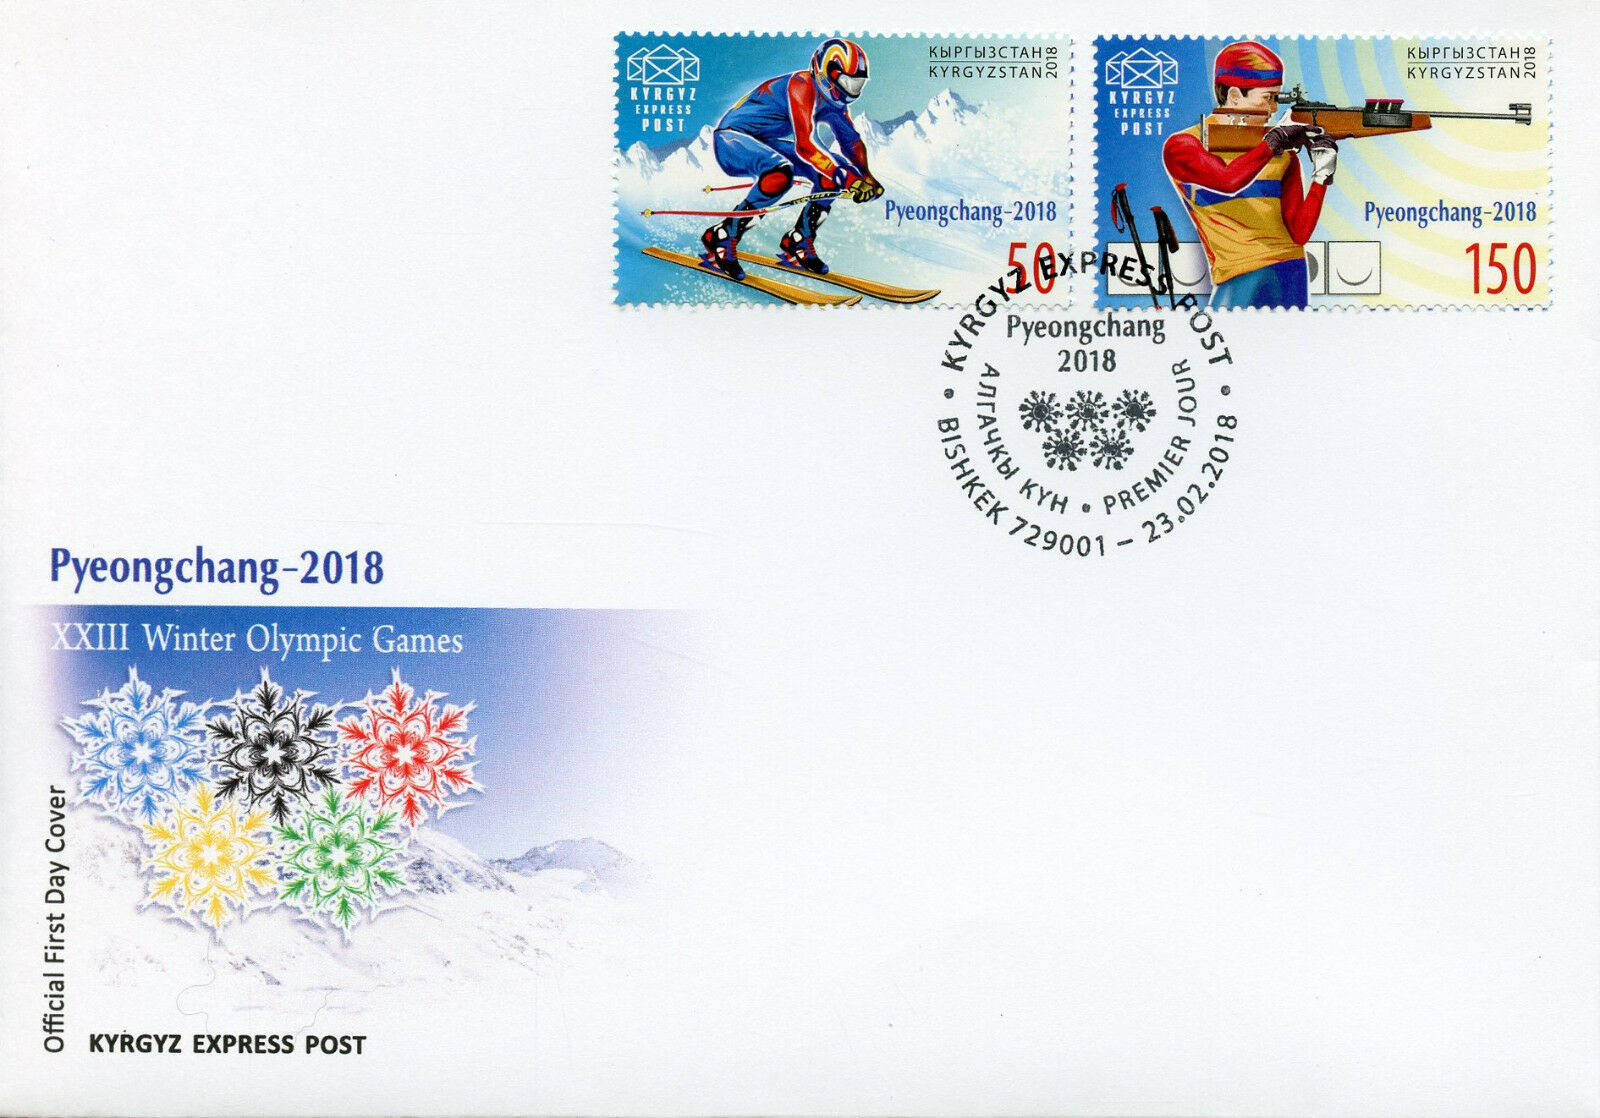 Kyrgyzstan KEP 2018 FDC Winter Olympics PyeongChang 2018 2v Cover Sports Stamps